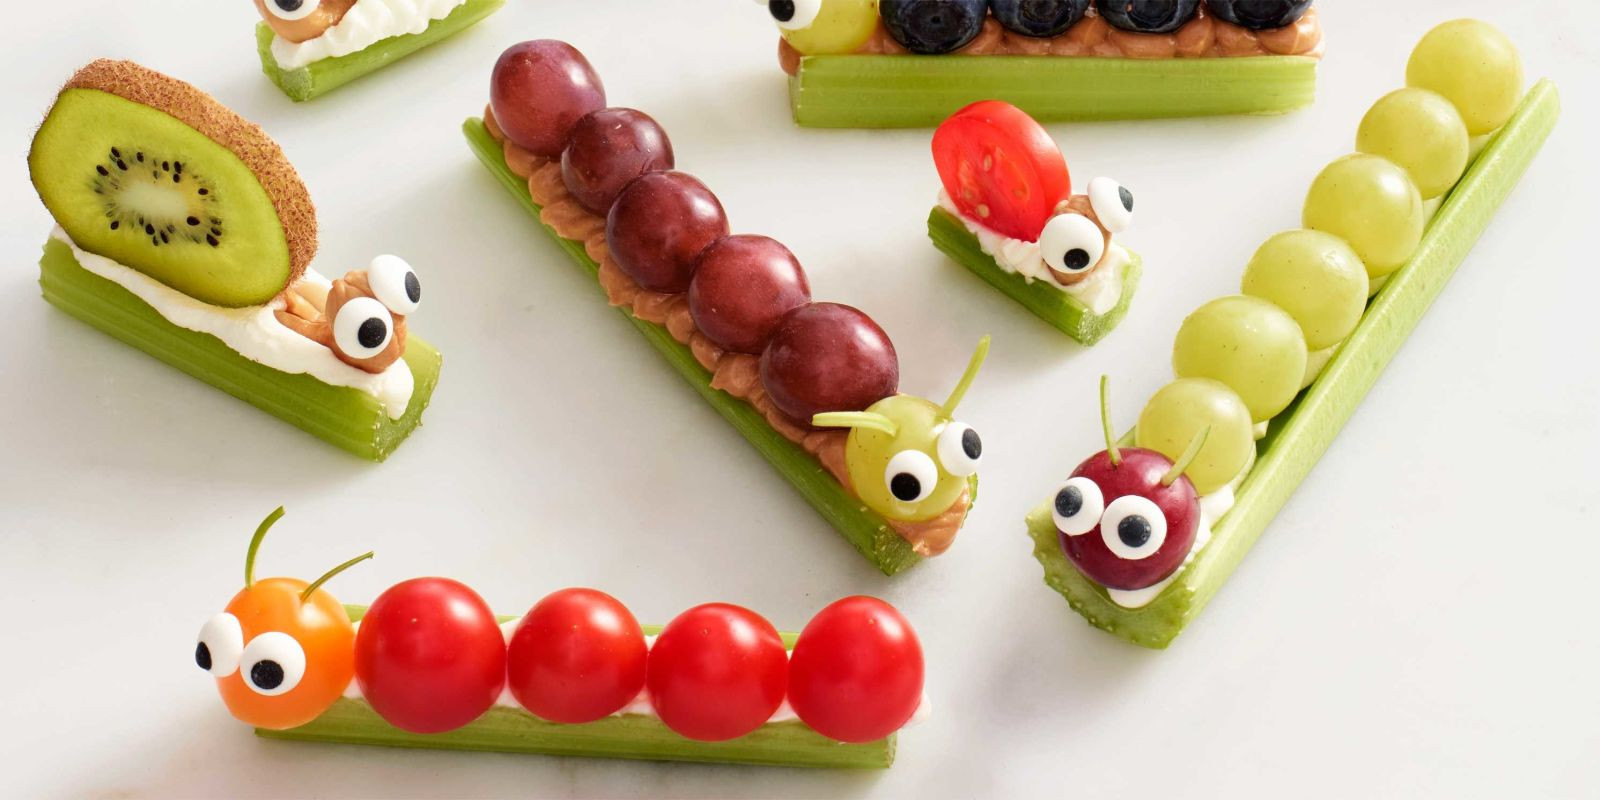 Recipes For Little Kids
 22 Easy After School Snacks Your Kids Will Go Wild Over